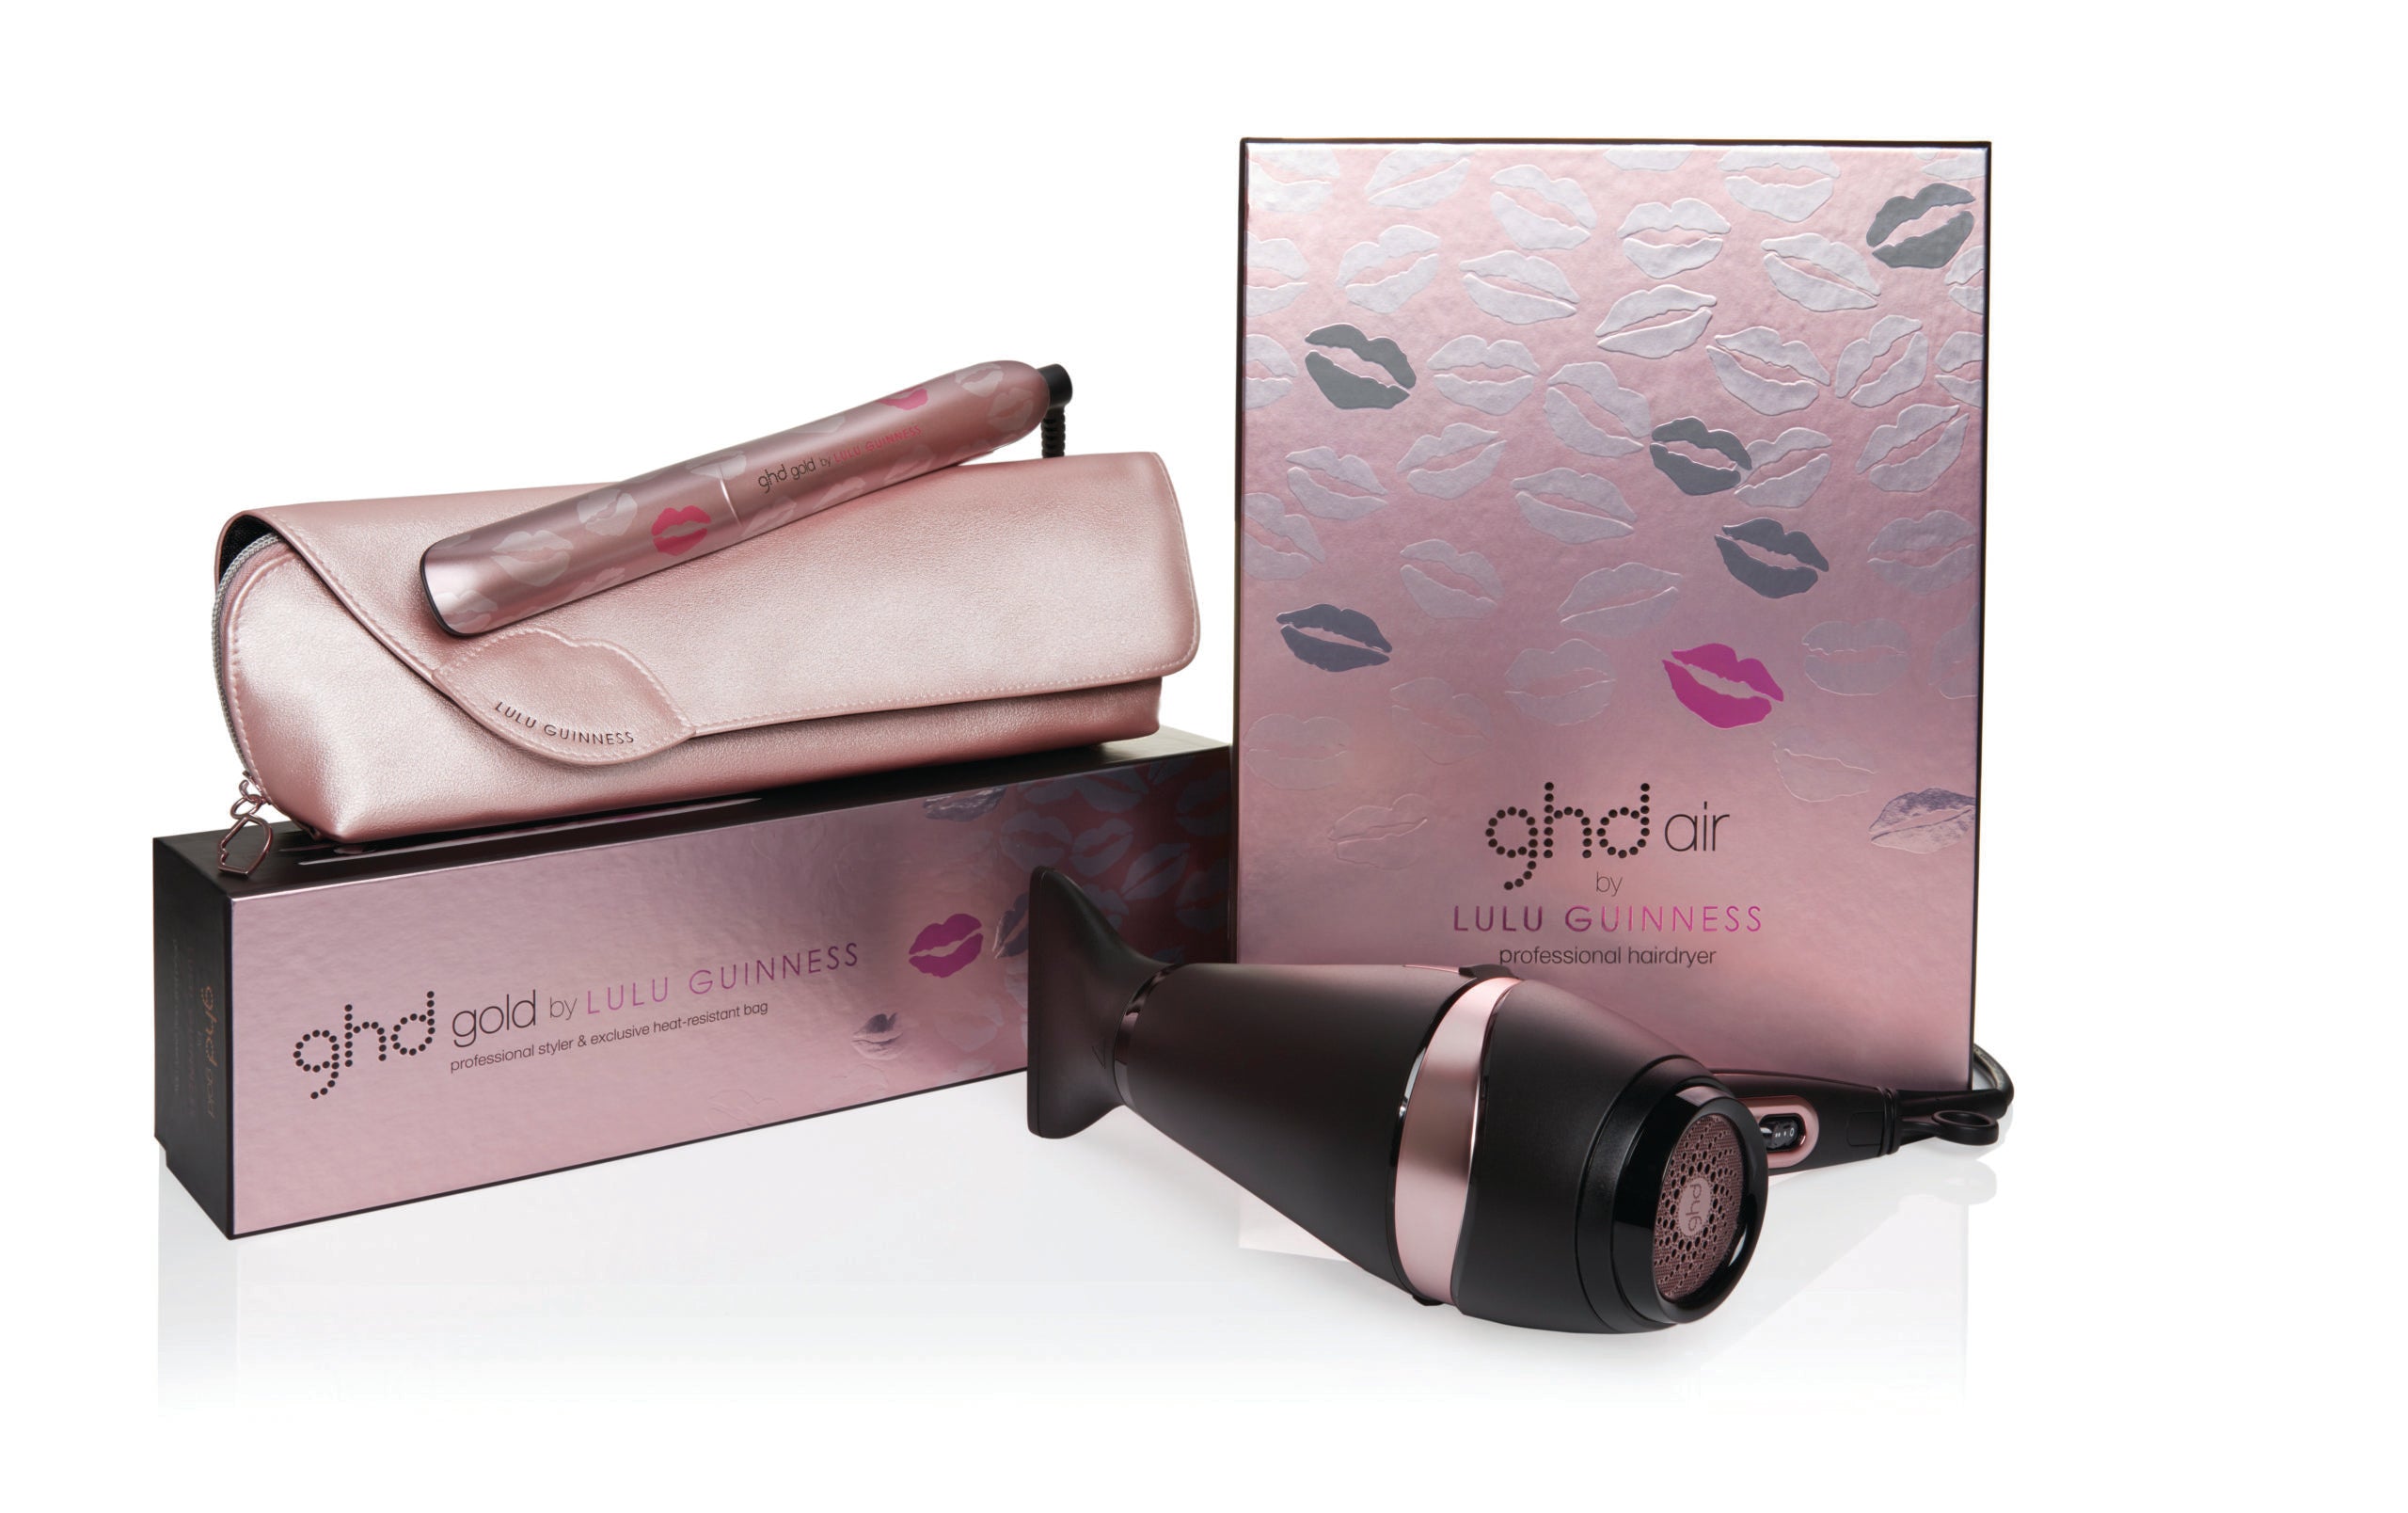 Review, Photos, Hairstyle, Hair Tools, Haircare Trend 2018, 2019, 2020: GHD, Lulu Guinness, Gold Styler 1" Flat Iron, Pink Air Dryer